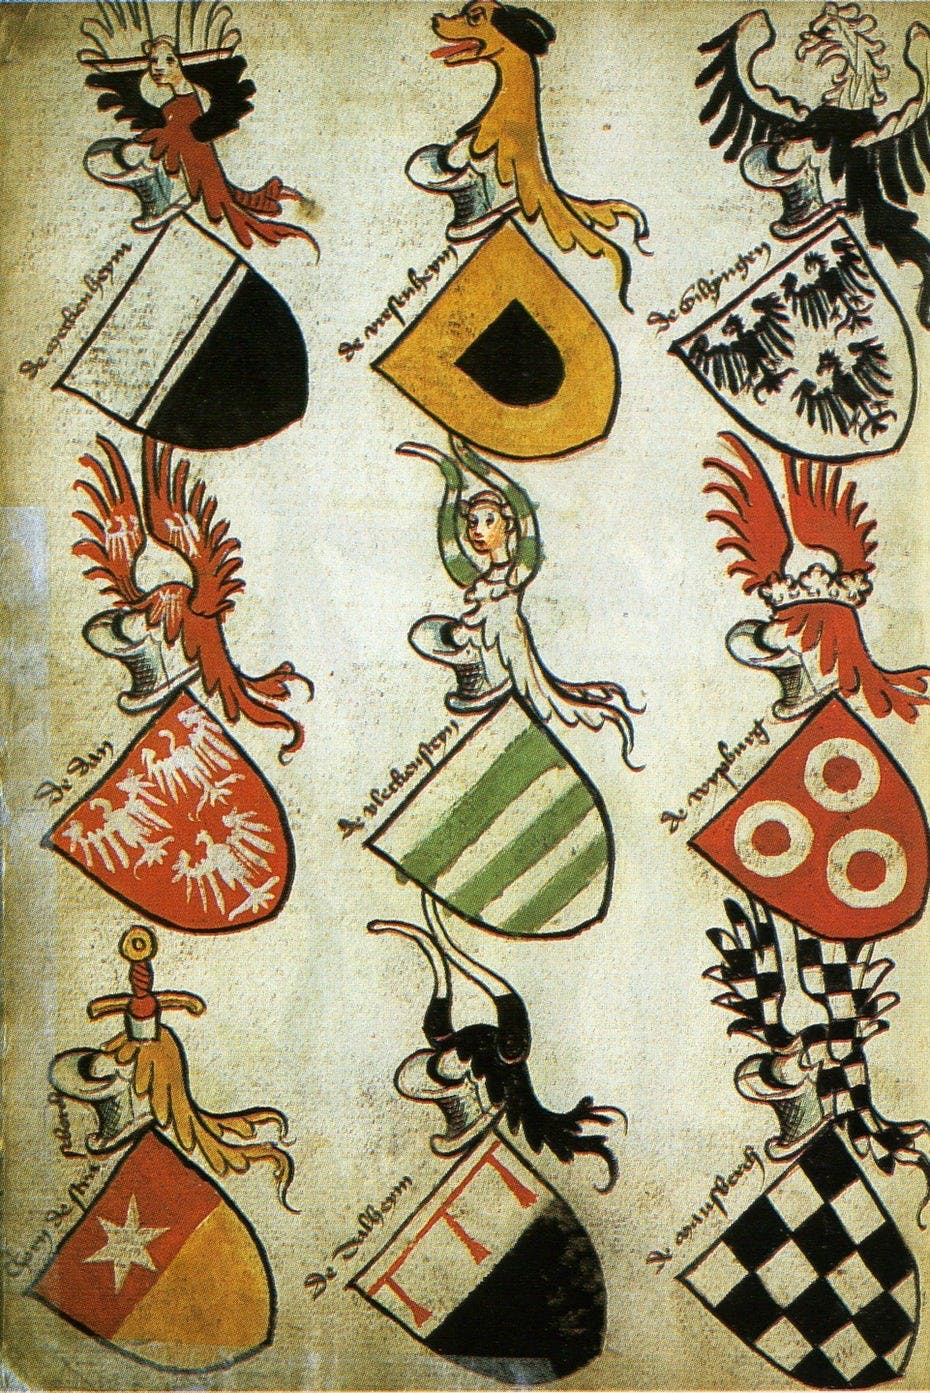 15th century German coats-of-arms